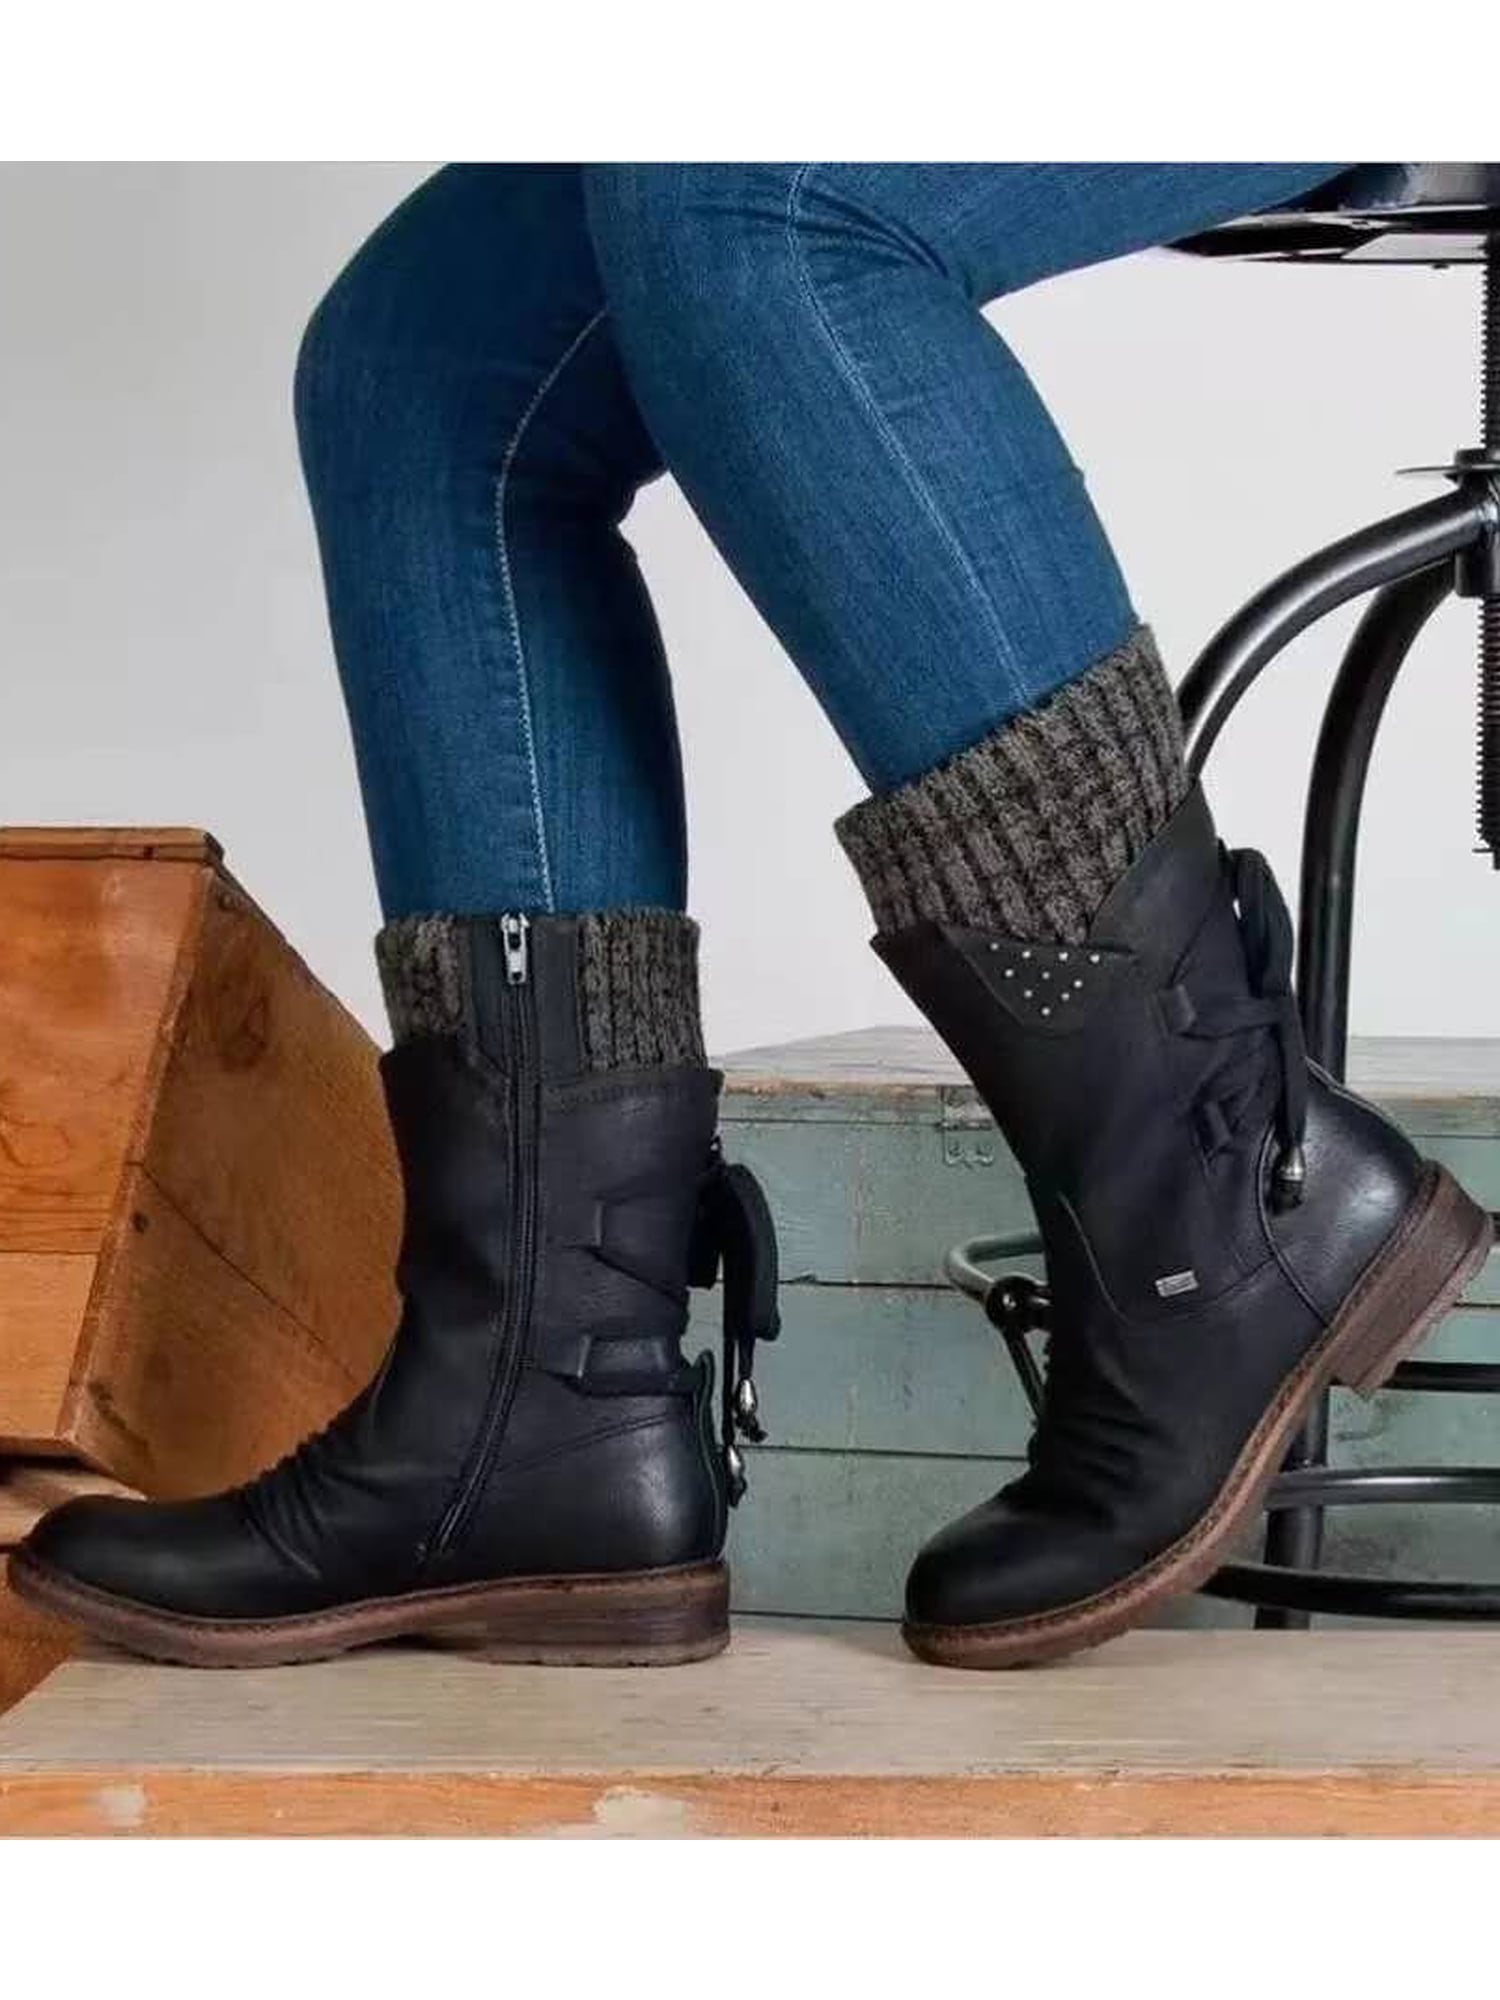 Details about   Women's Casual Lace Up Low Heel Motorcycle Buckle Mid Calf Riding Boots Winter D 